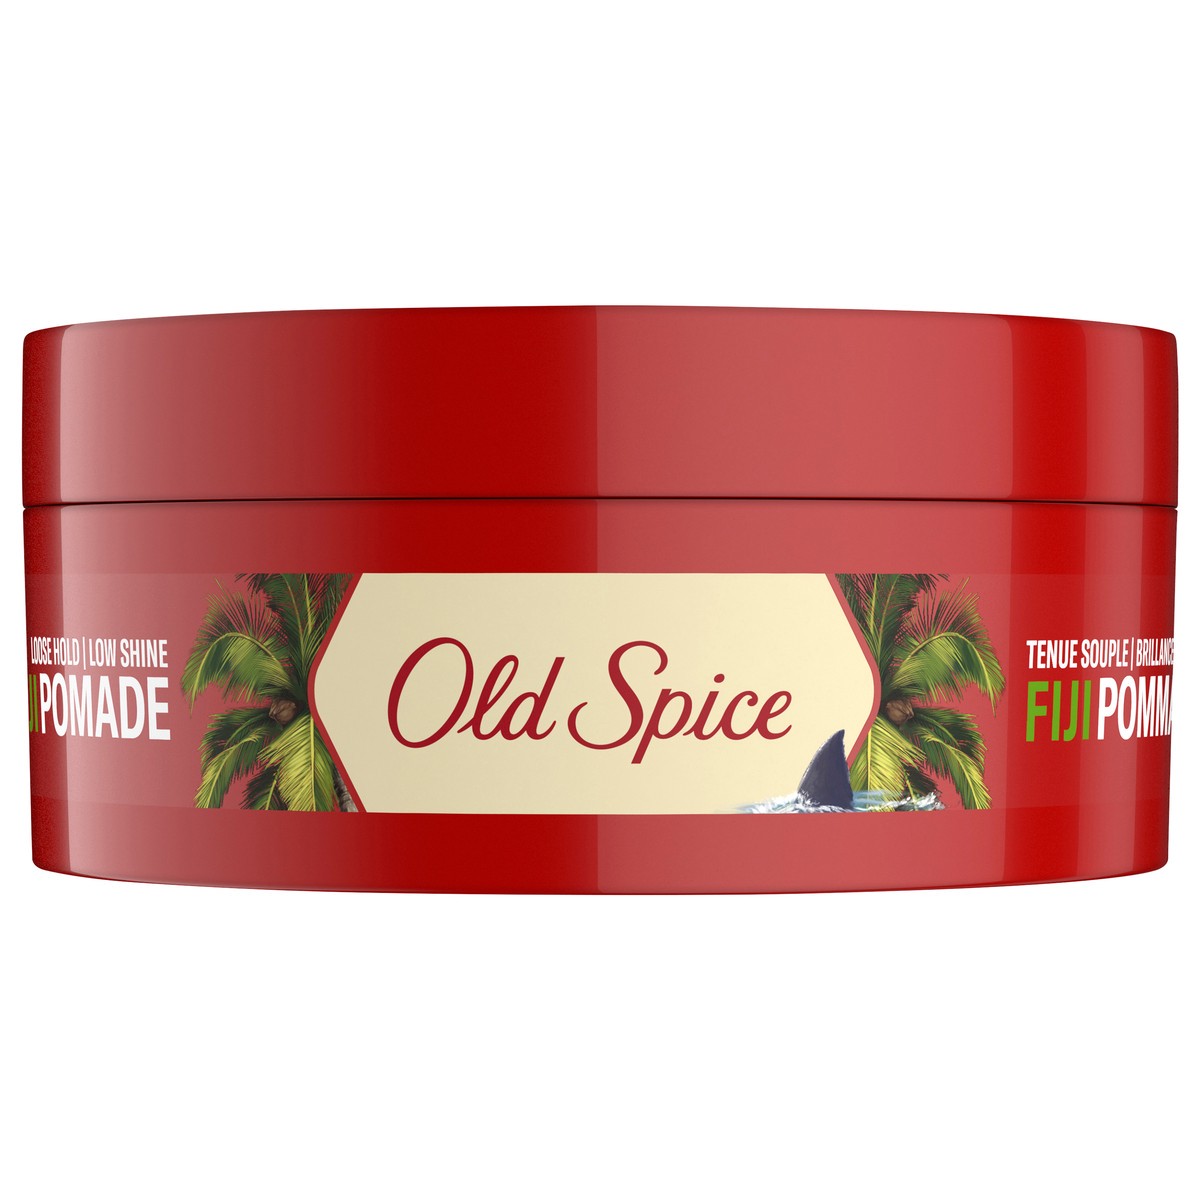 Old Spice Hair Styling Pomade for Men, 2.22 oz - The Fresh Grocer